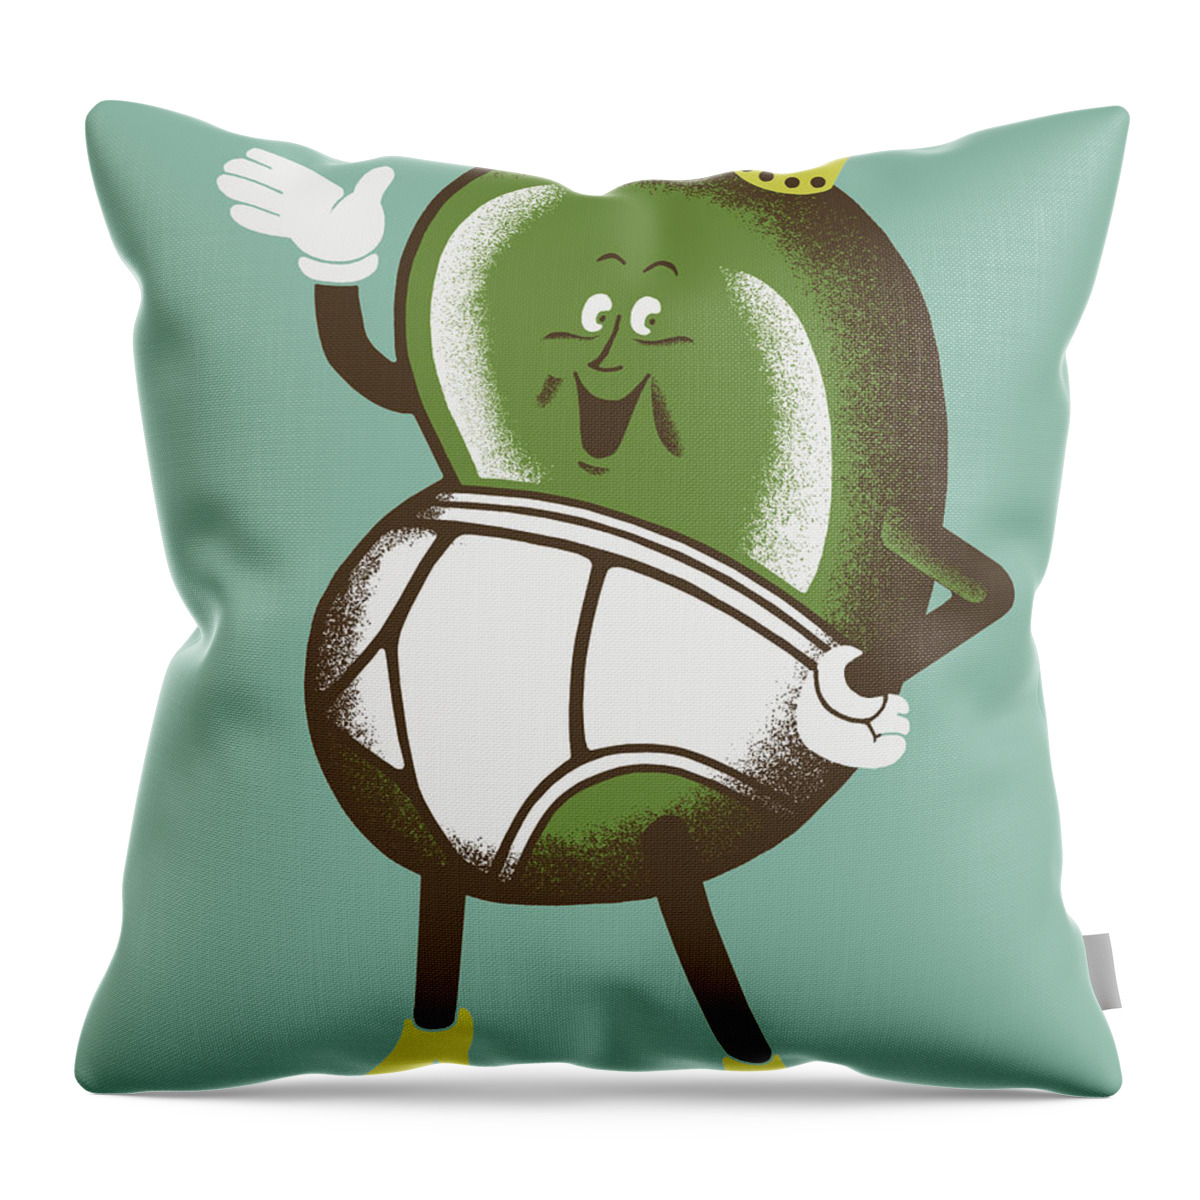 Apparel Throw Pillow featuring the drawing Jelly Bean King Wearing Underwear by CSA Images